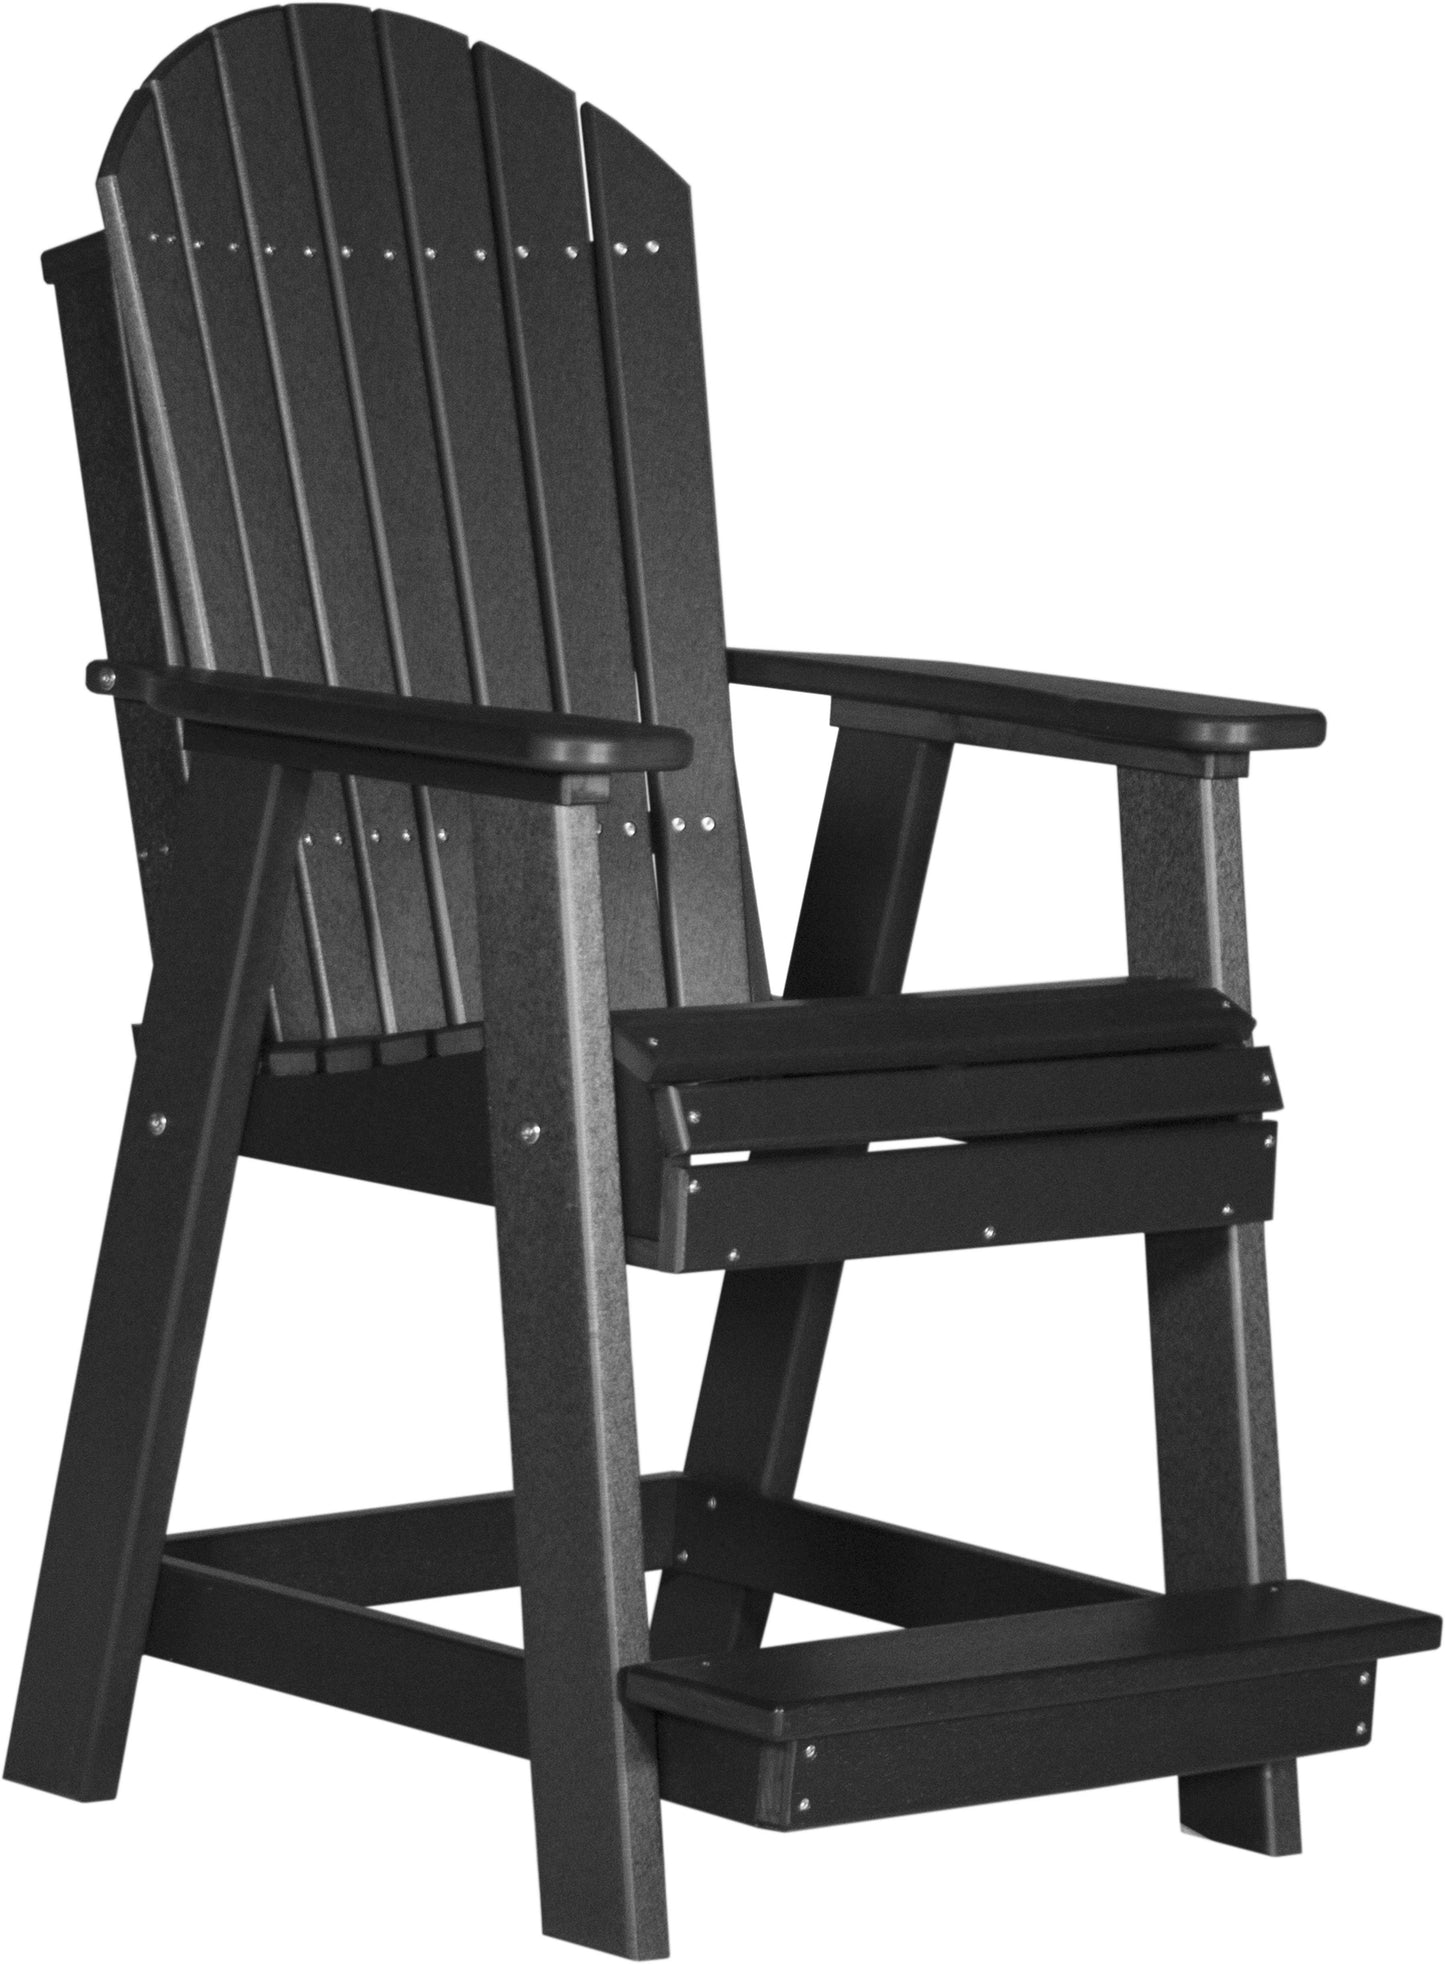 luxcraft counter height recycled plastic adirondack balcony chair black